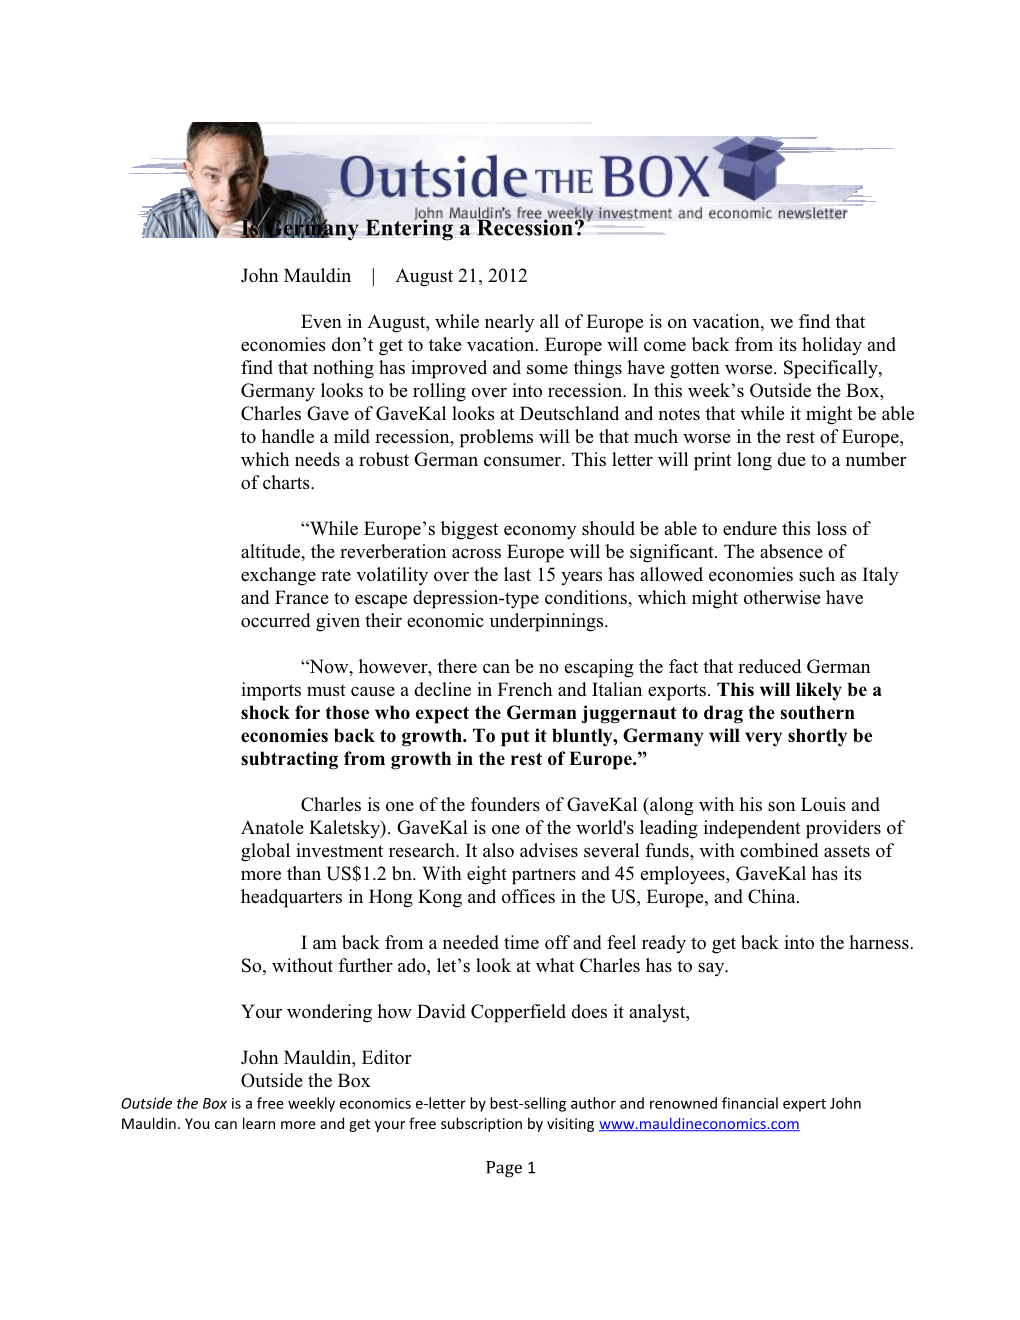 Outside the Box Is a Free Weekly Economic E-Letter by Best-Selling Author and Renowned